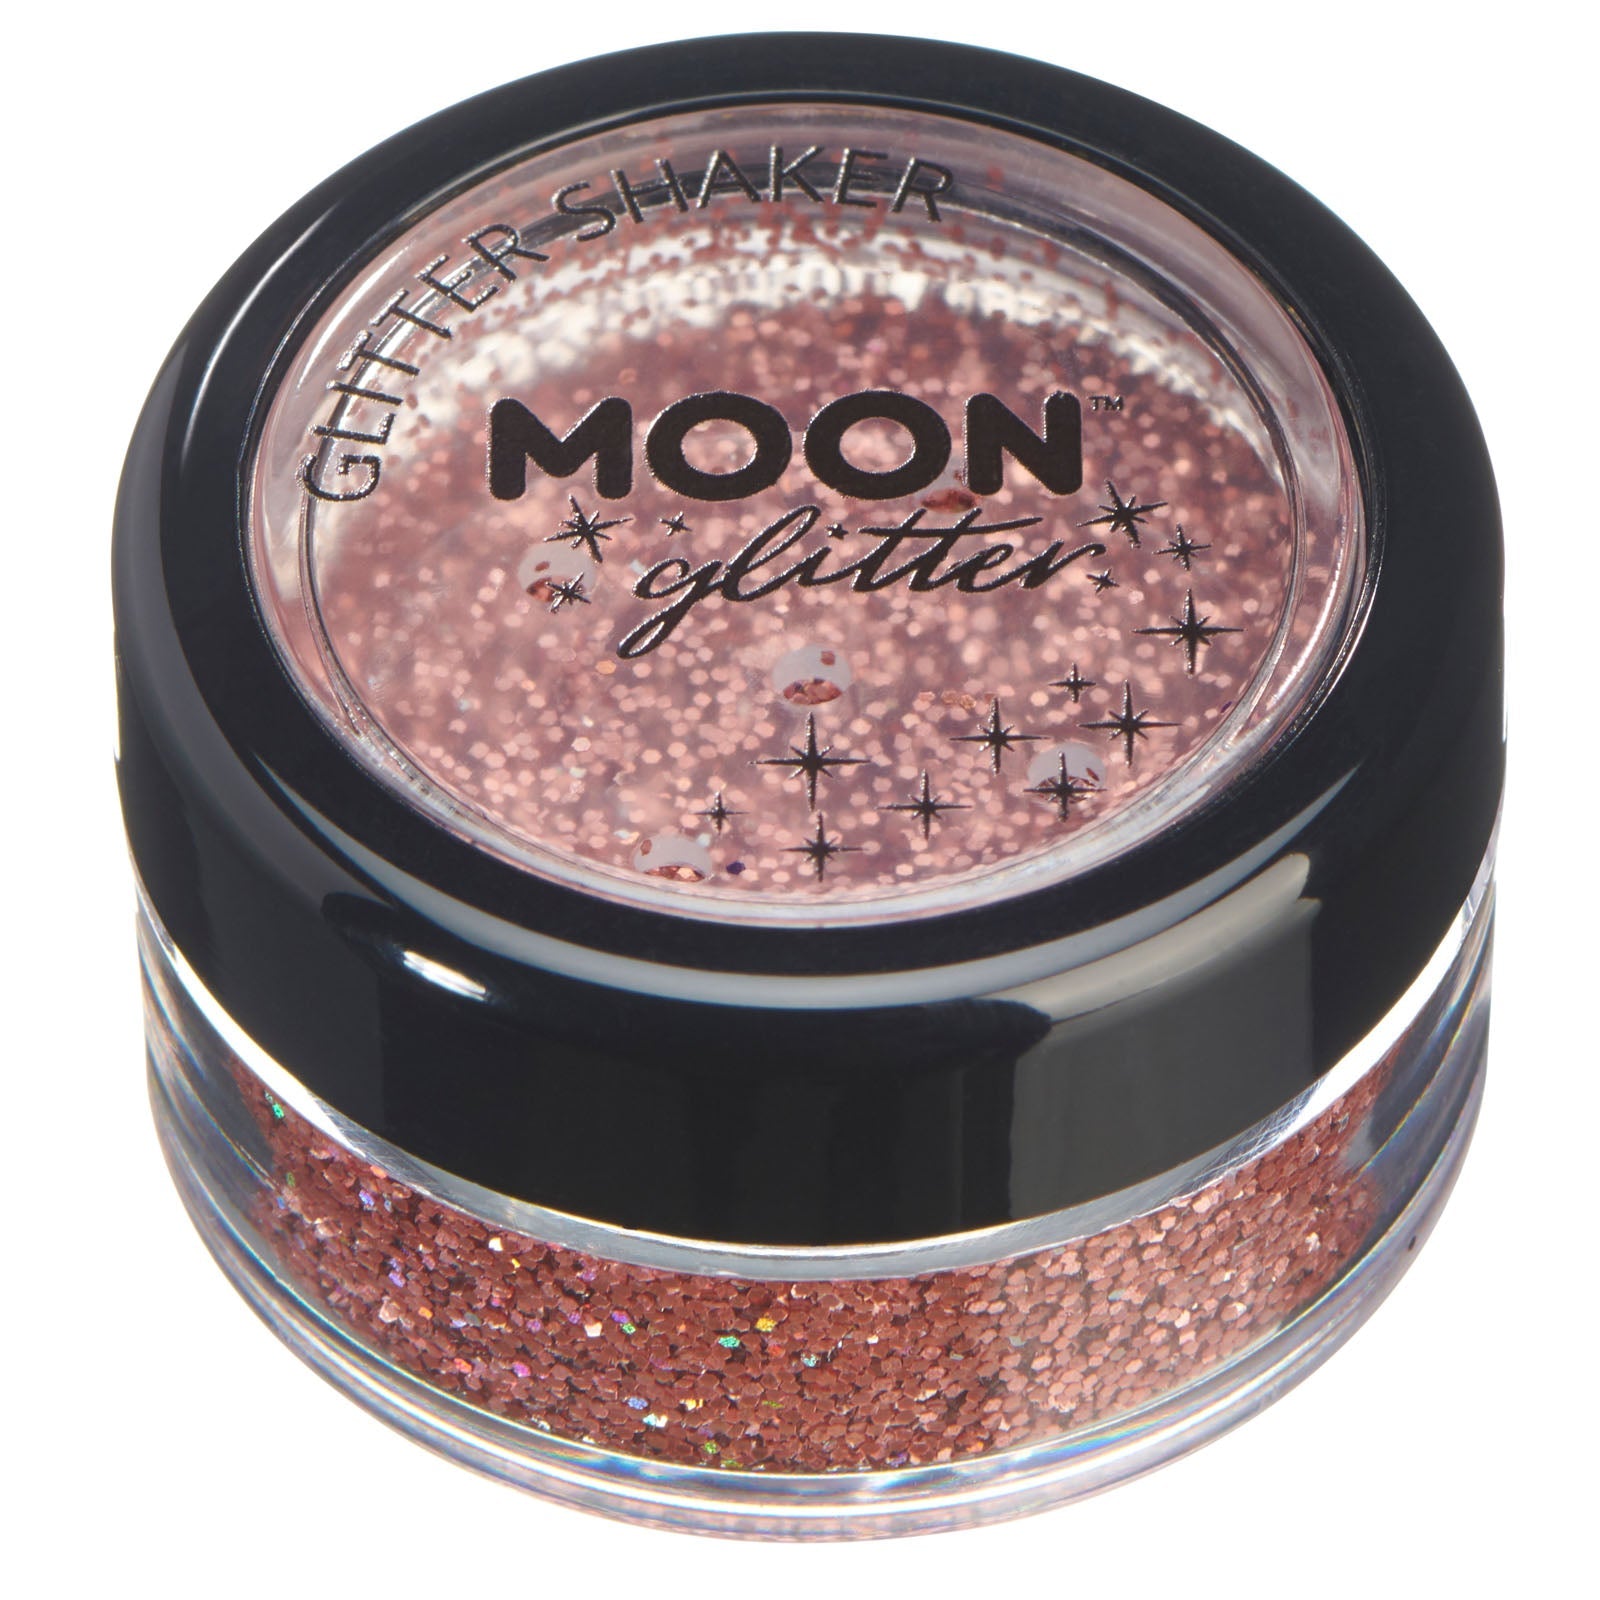 Rose Gold - Holographic Fine Face & Body Glitter Shaker, 5g. Cosmetically certified, FDA & Health Canada compliant, cruelty free and vegan.